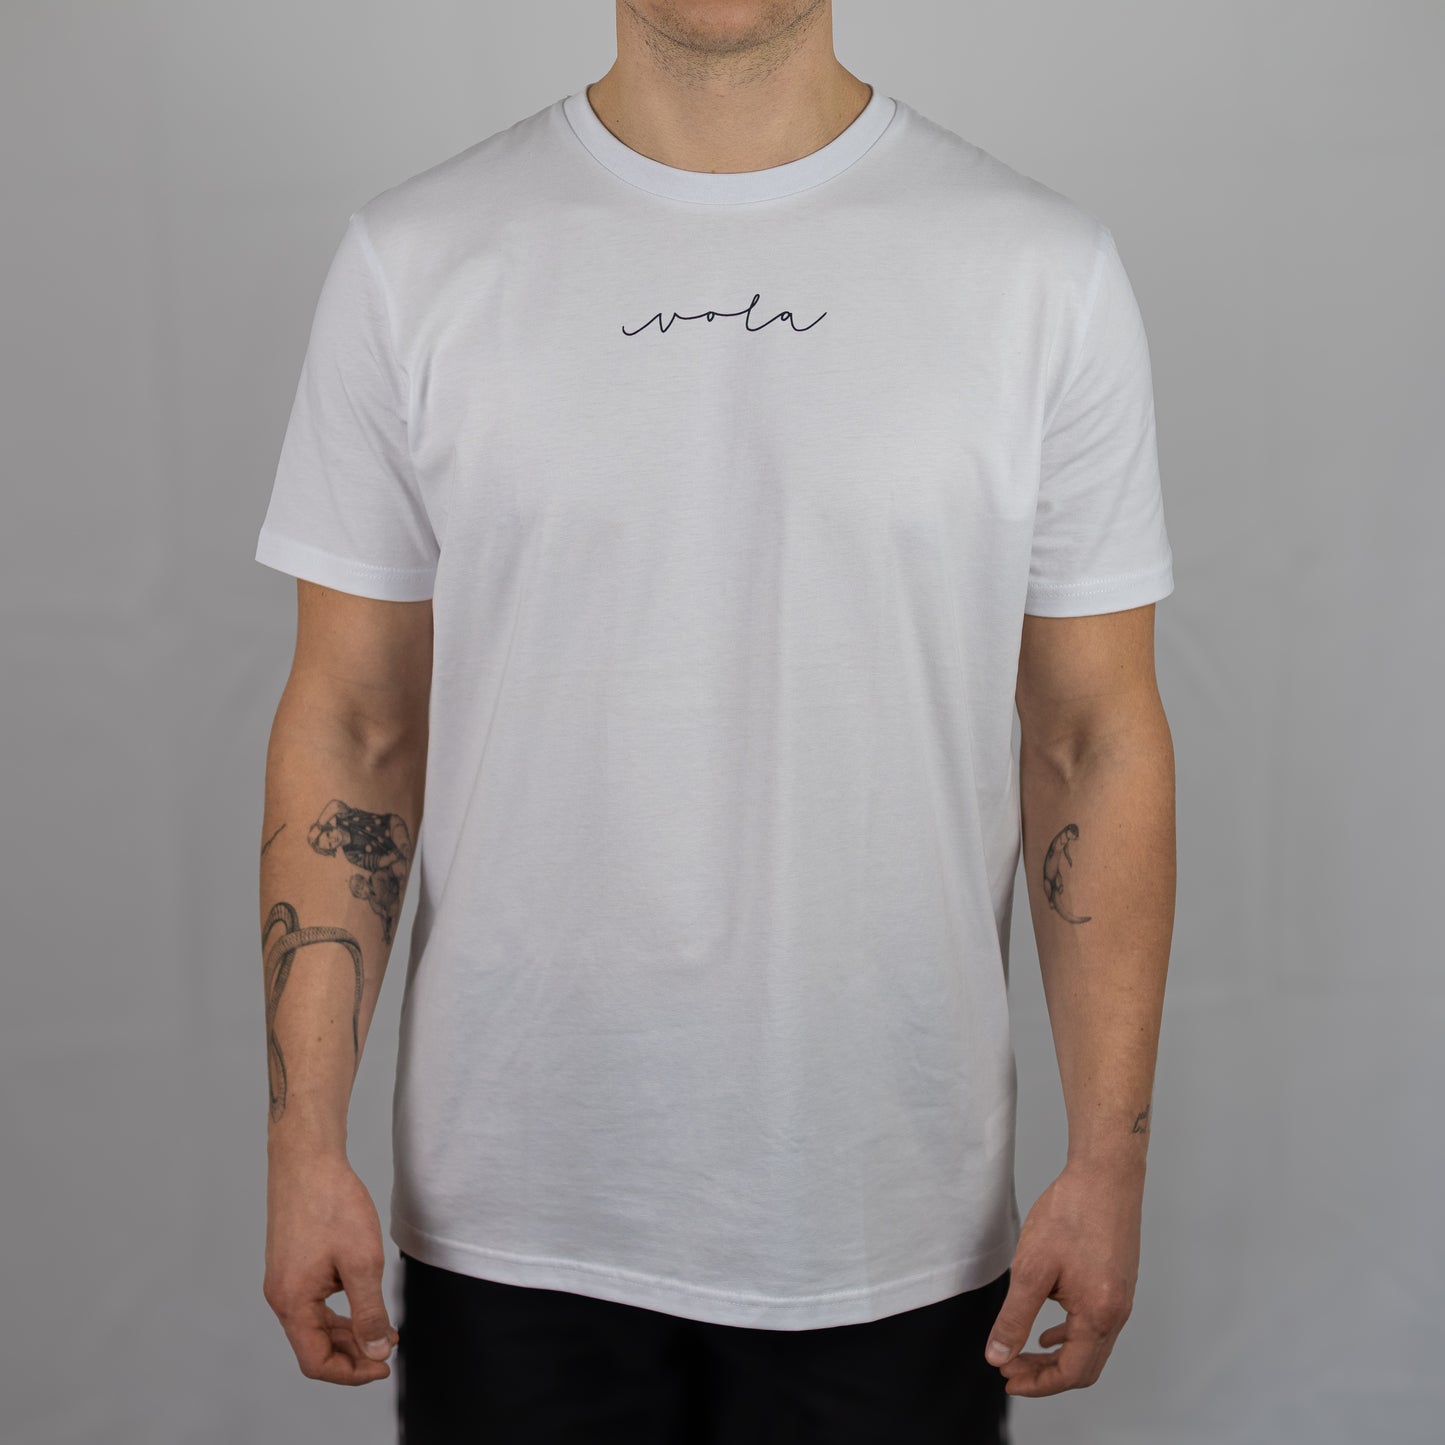 T-shirt "Connection" white